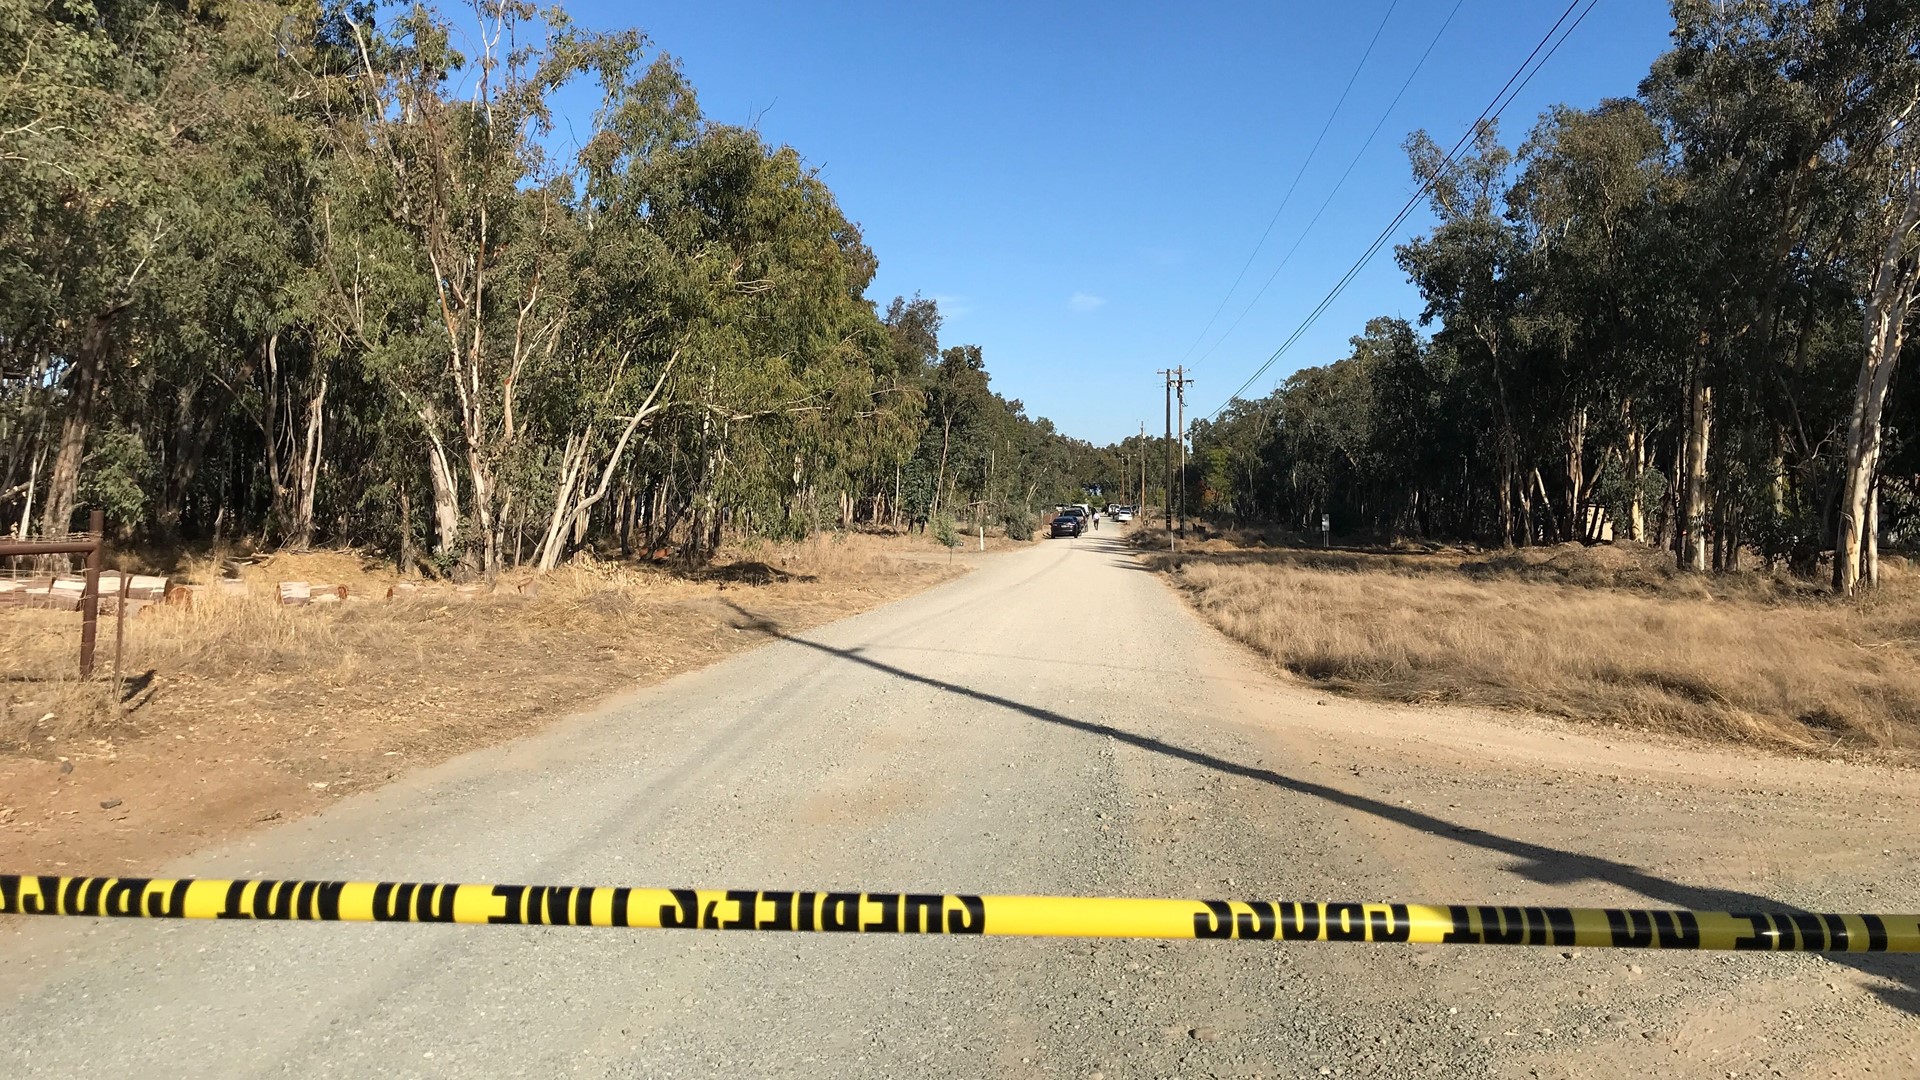 A man was shot and killed by a Sacramento County Sheriff’s deputy in a rural area near the town of Herald, California, Sunday afternoon.